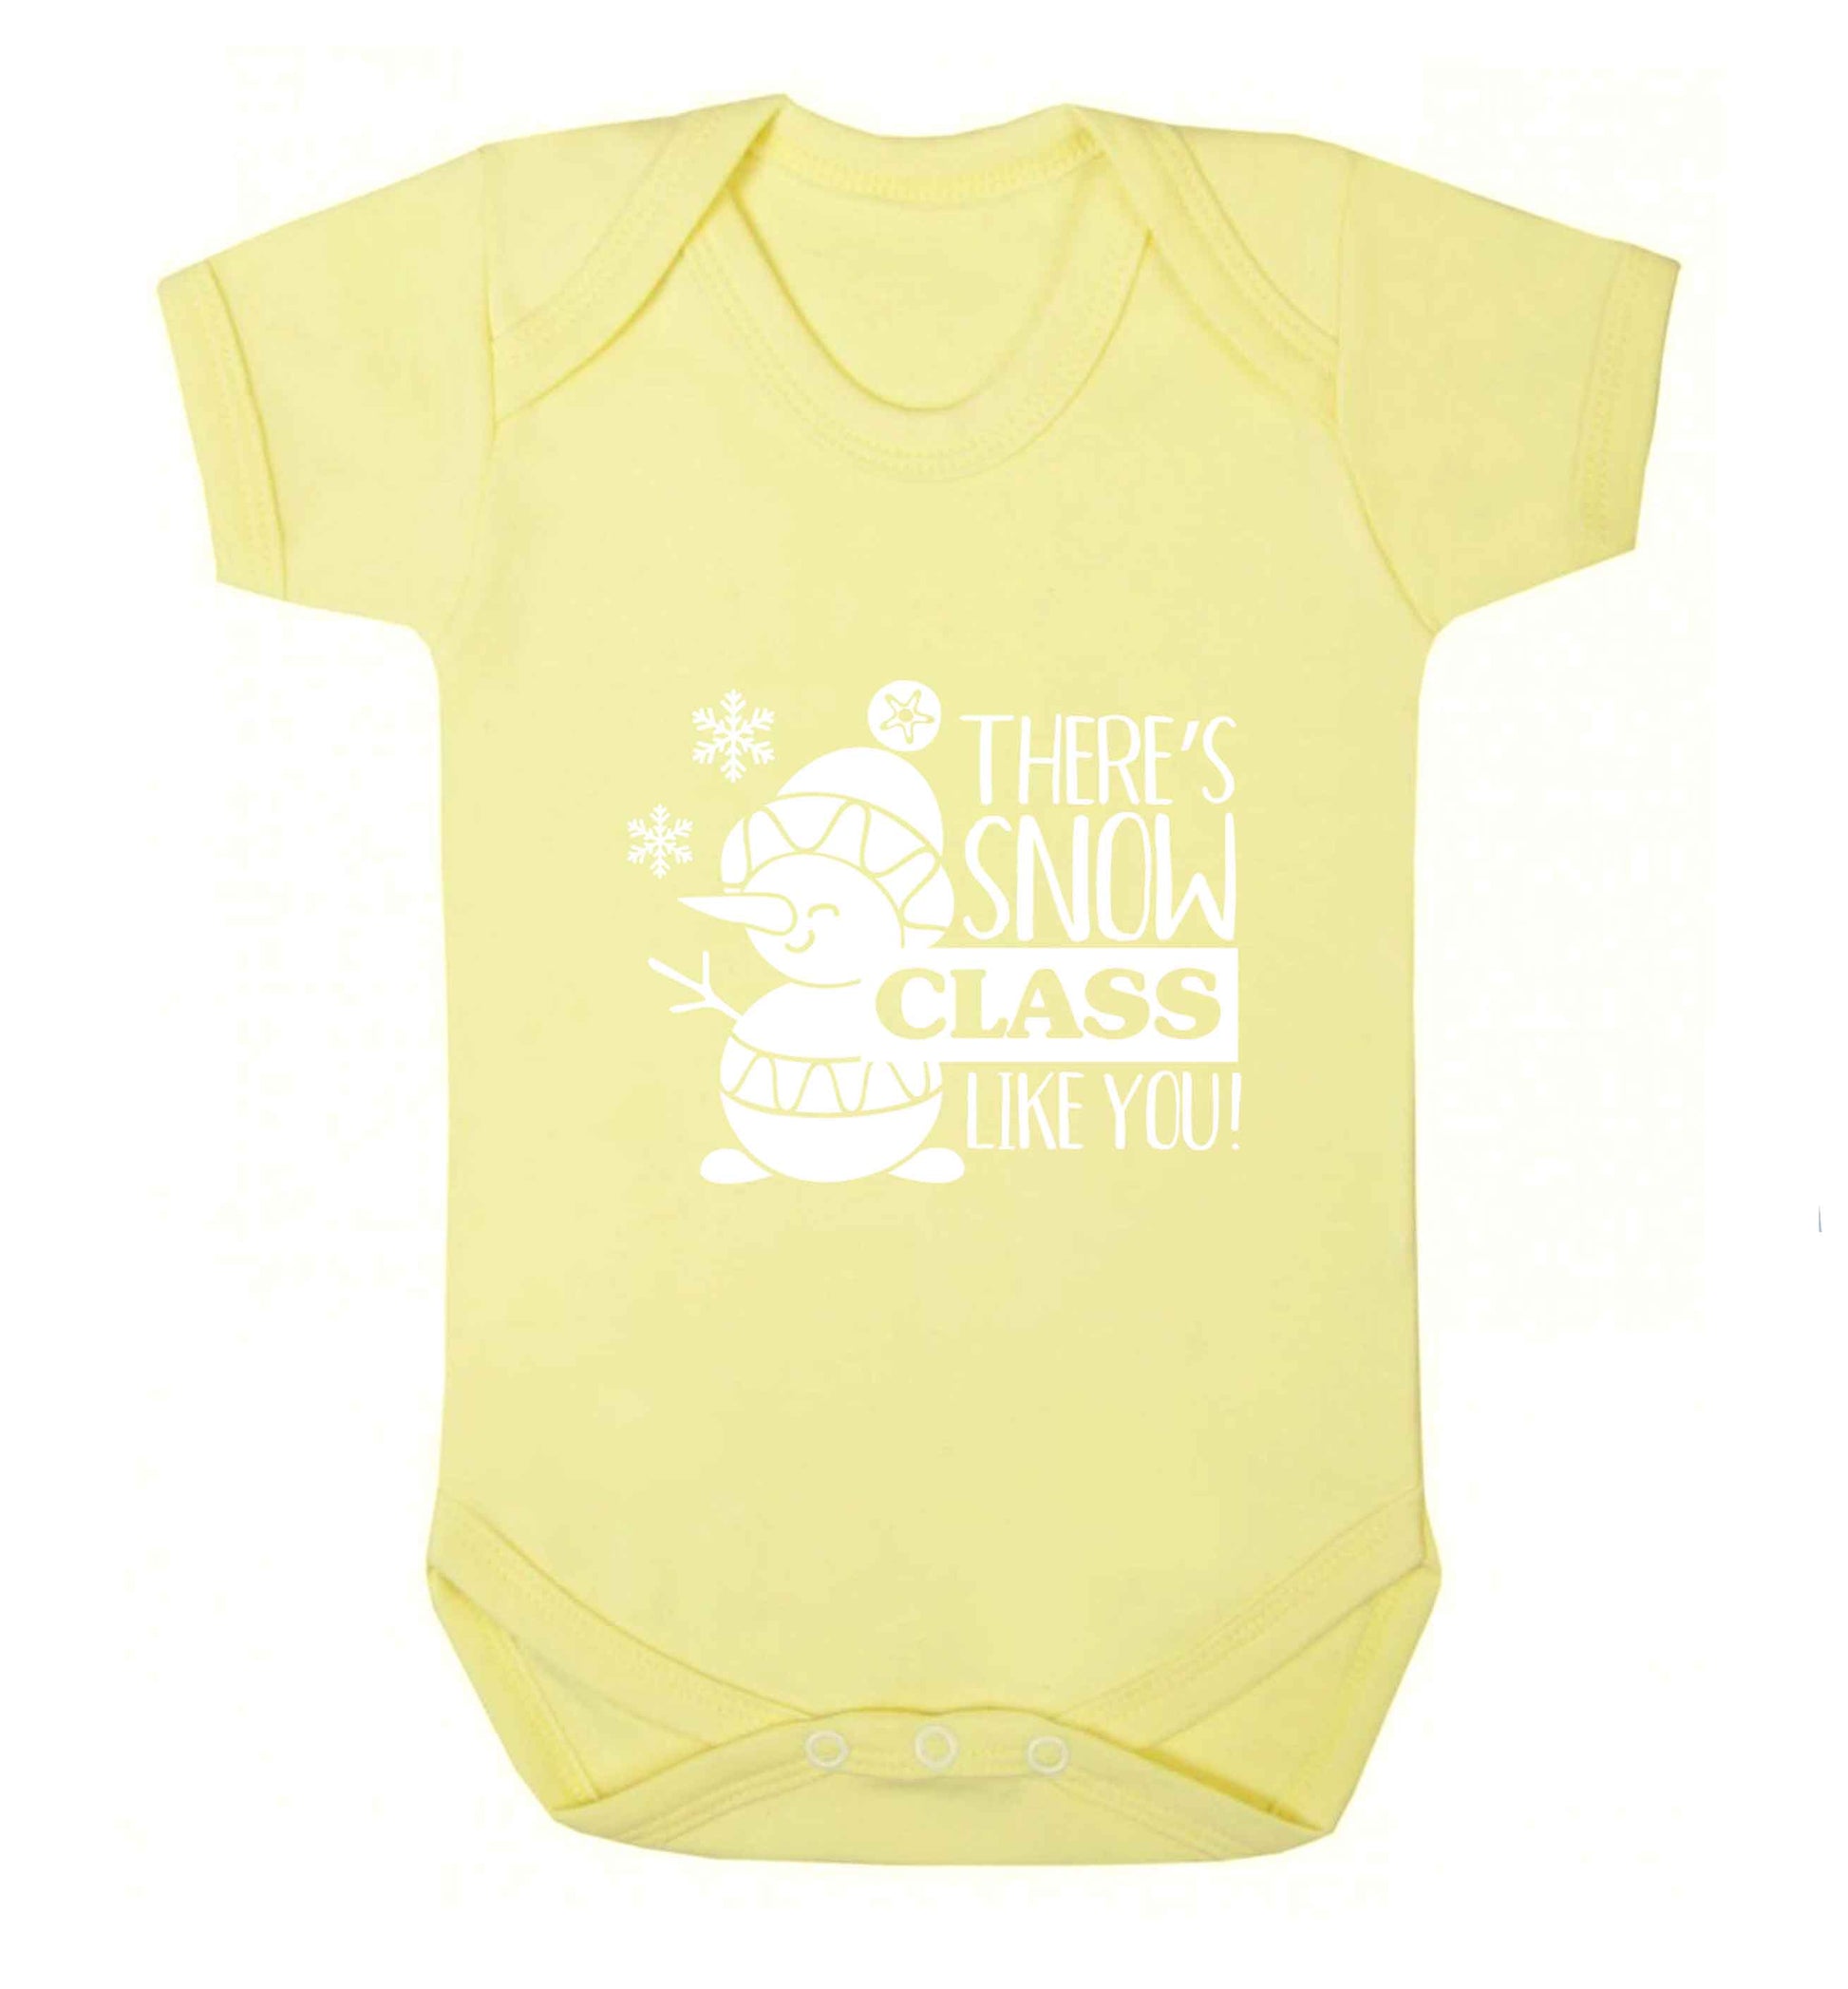 There's snow class like you baby vest pale yellow 18-24 months